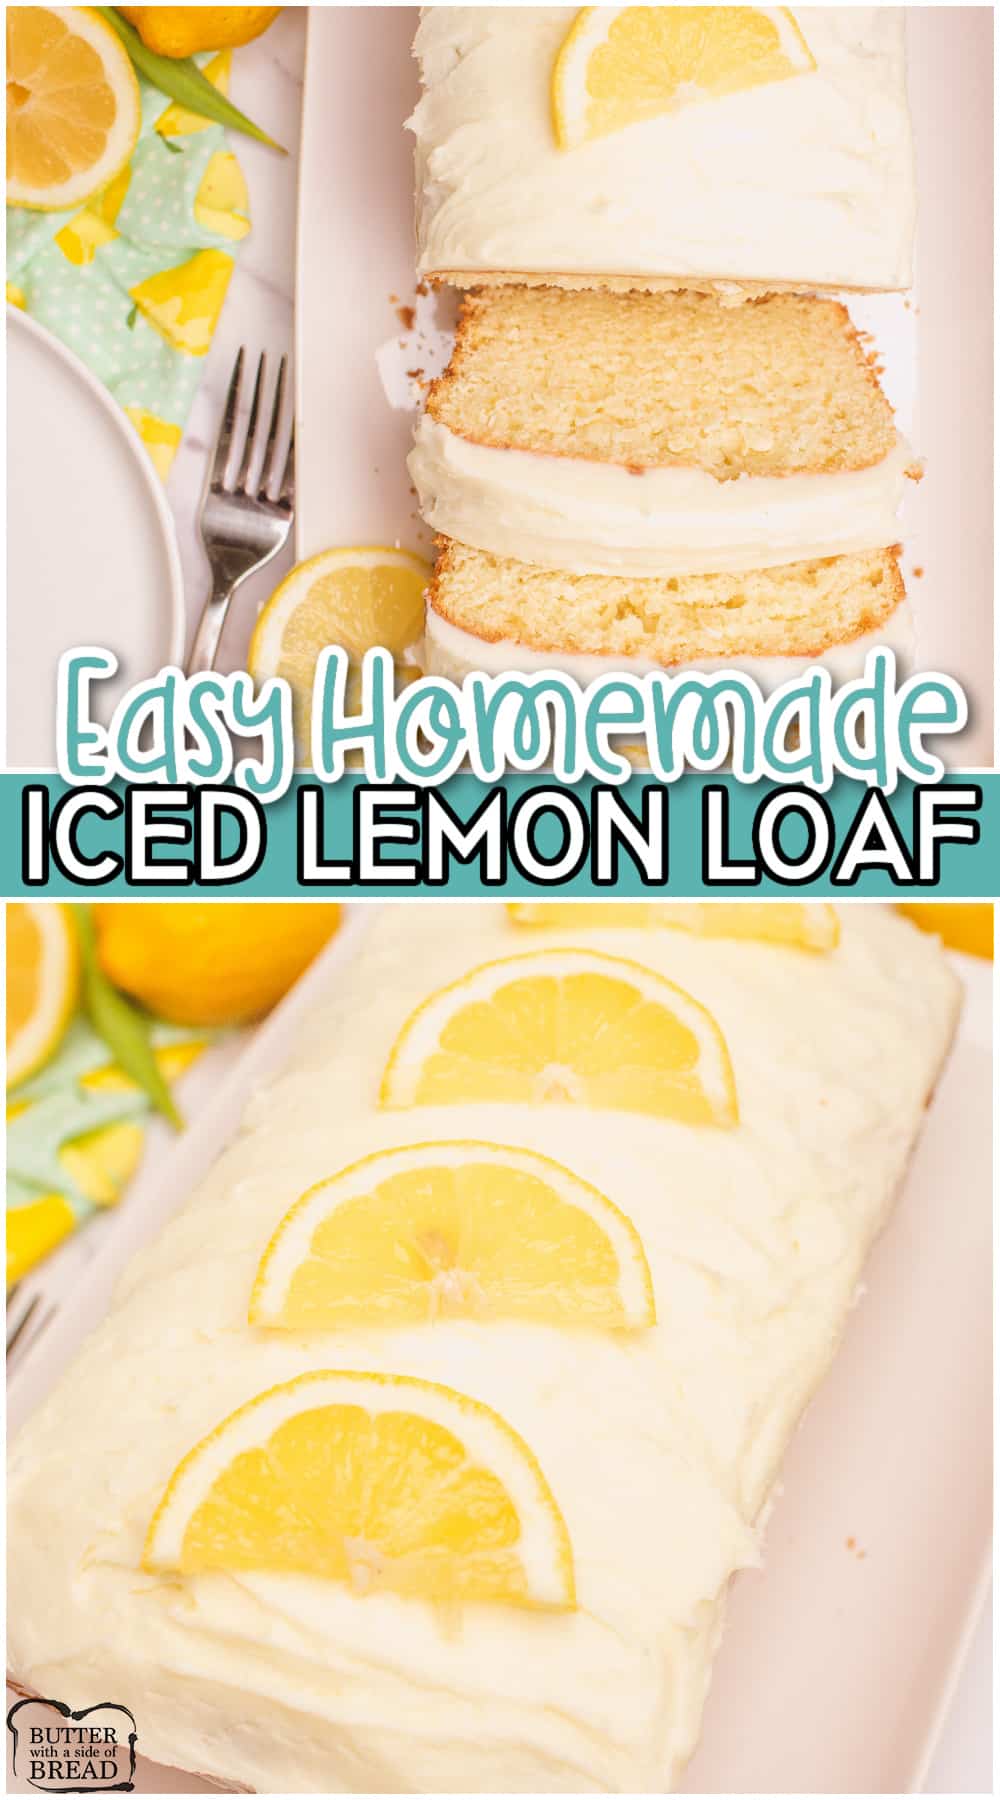 Iced Lemon Loaf is made with fresh lemon, sour cream, olive oil & sugar for a perfectly moist lemon bread!  It's sure to bring you a little bit of sunshine with every bite! 